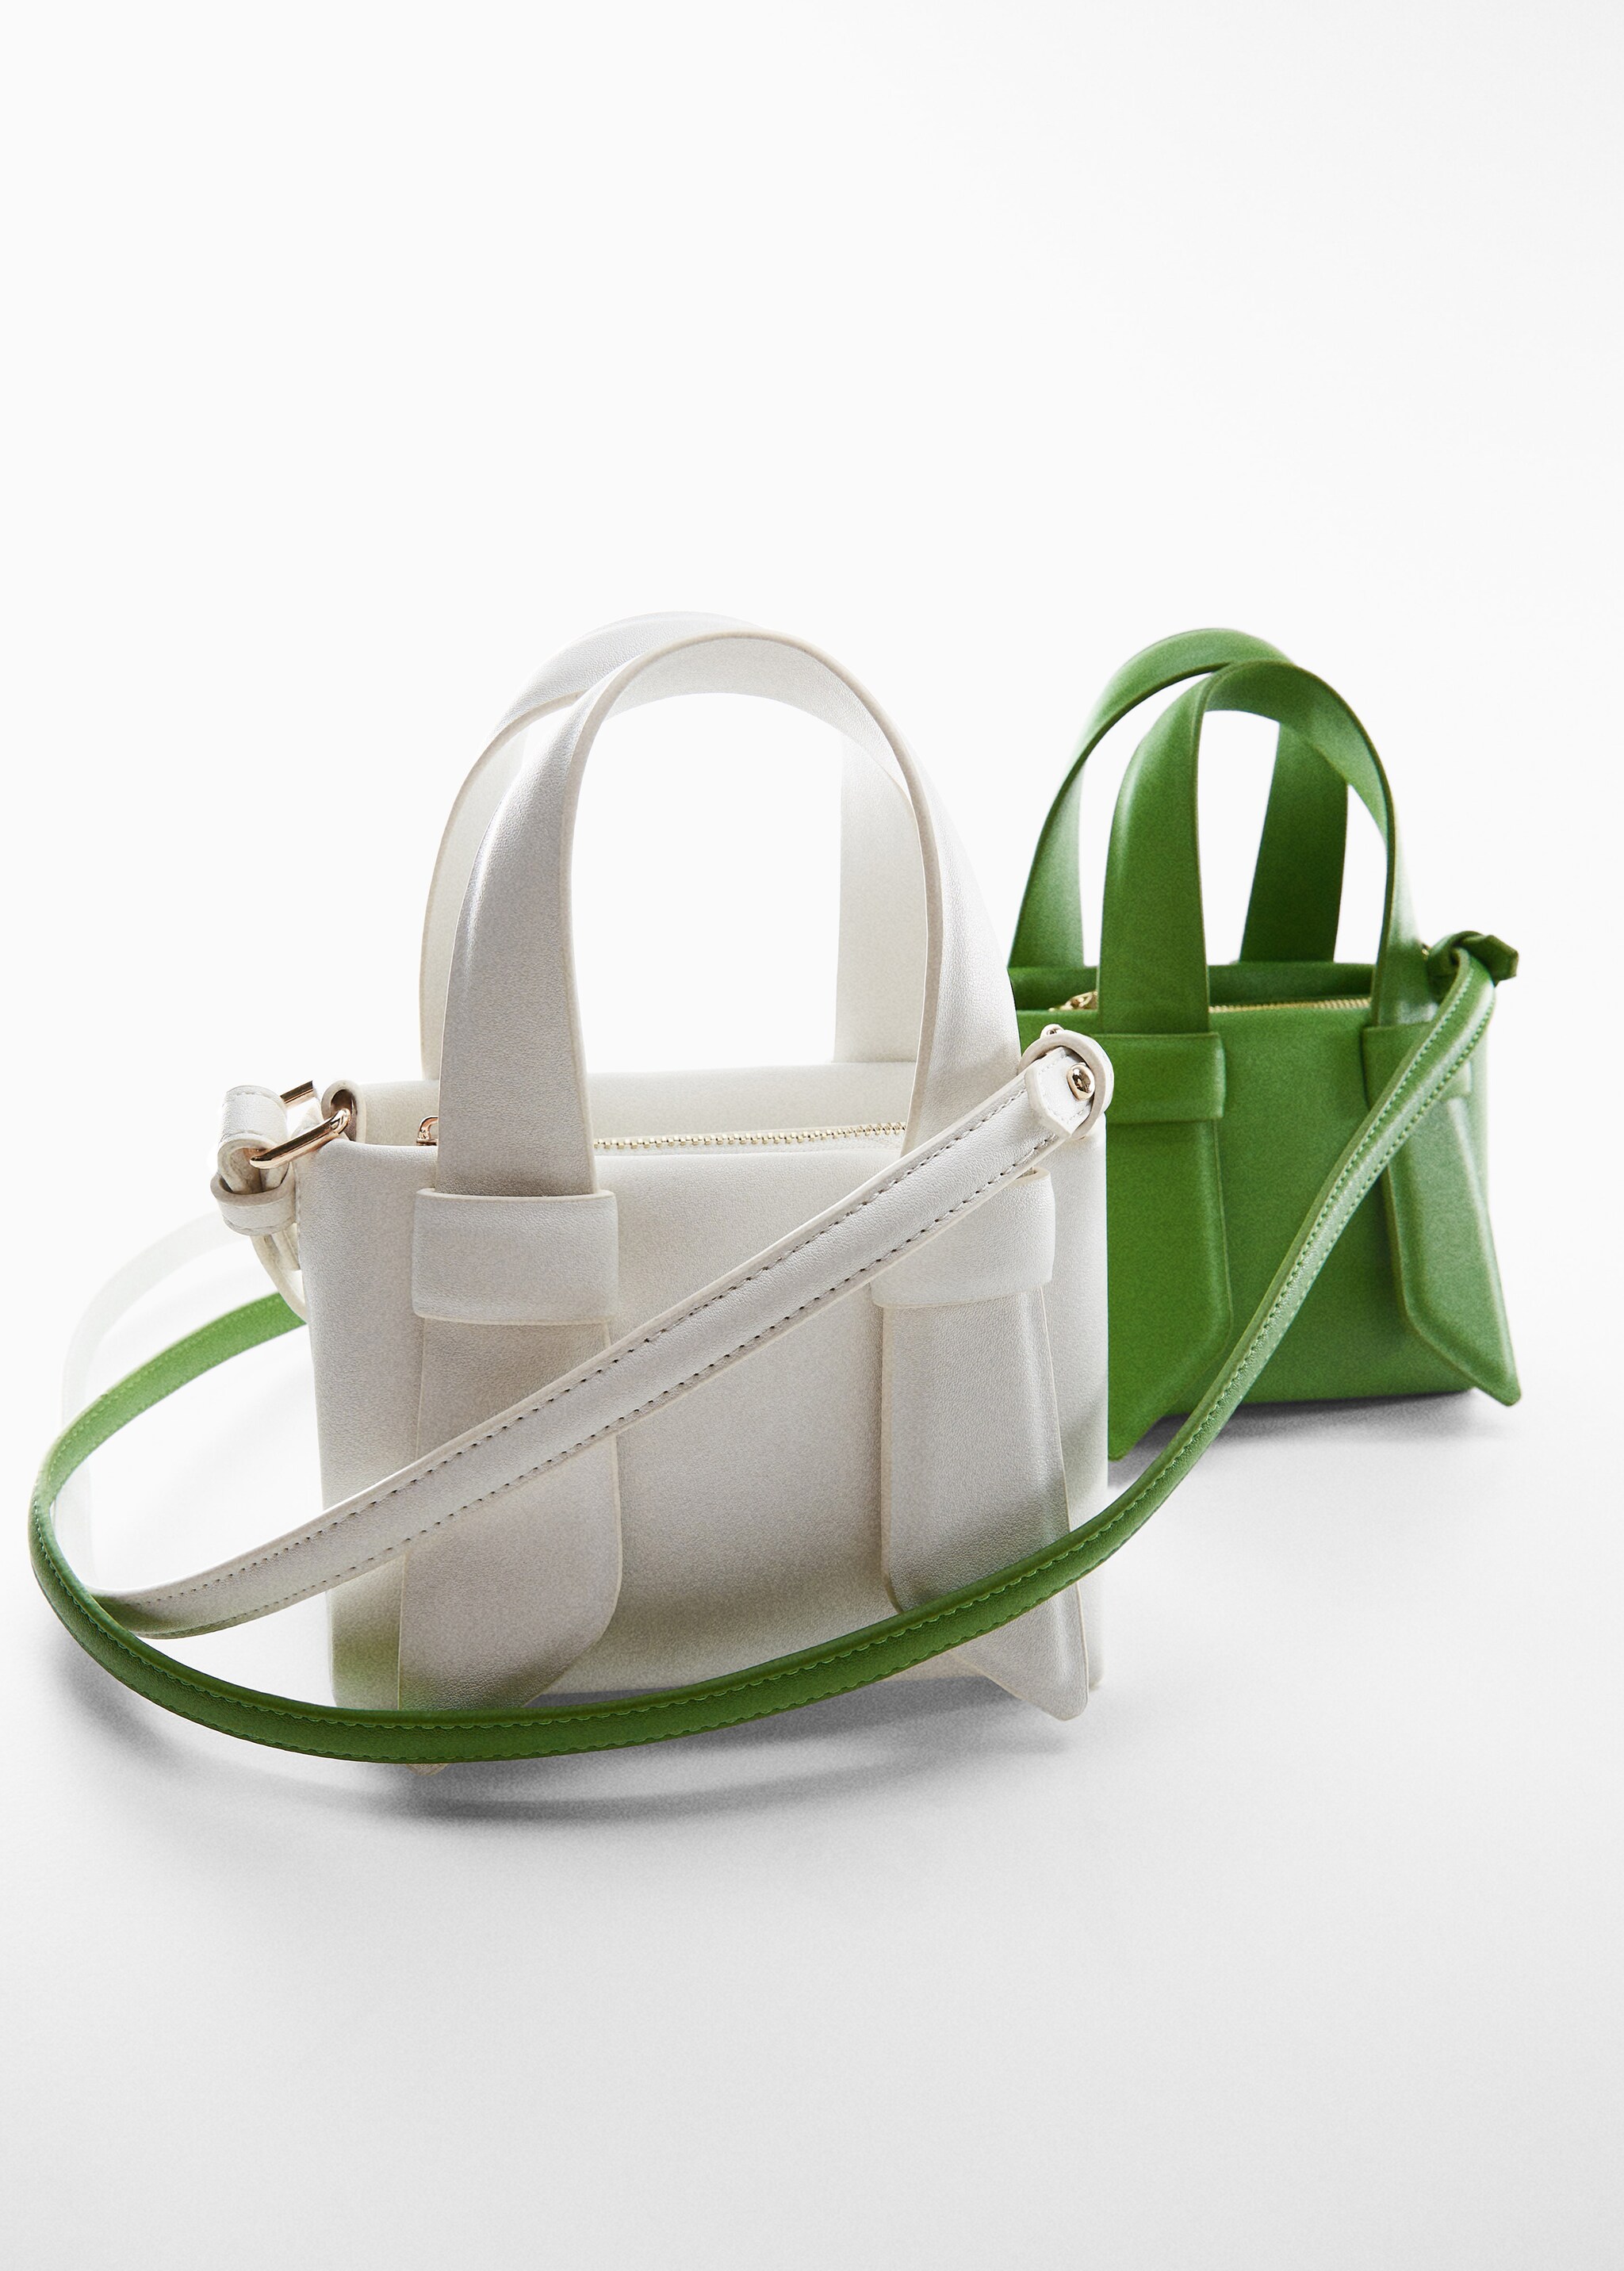 Crossbody bag with double handle - Details of the article 5